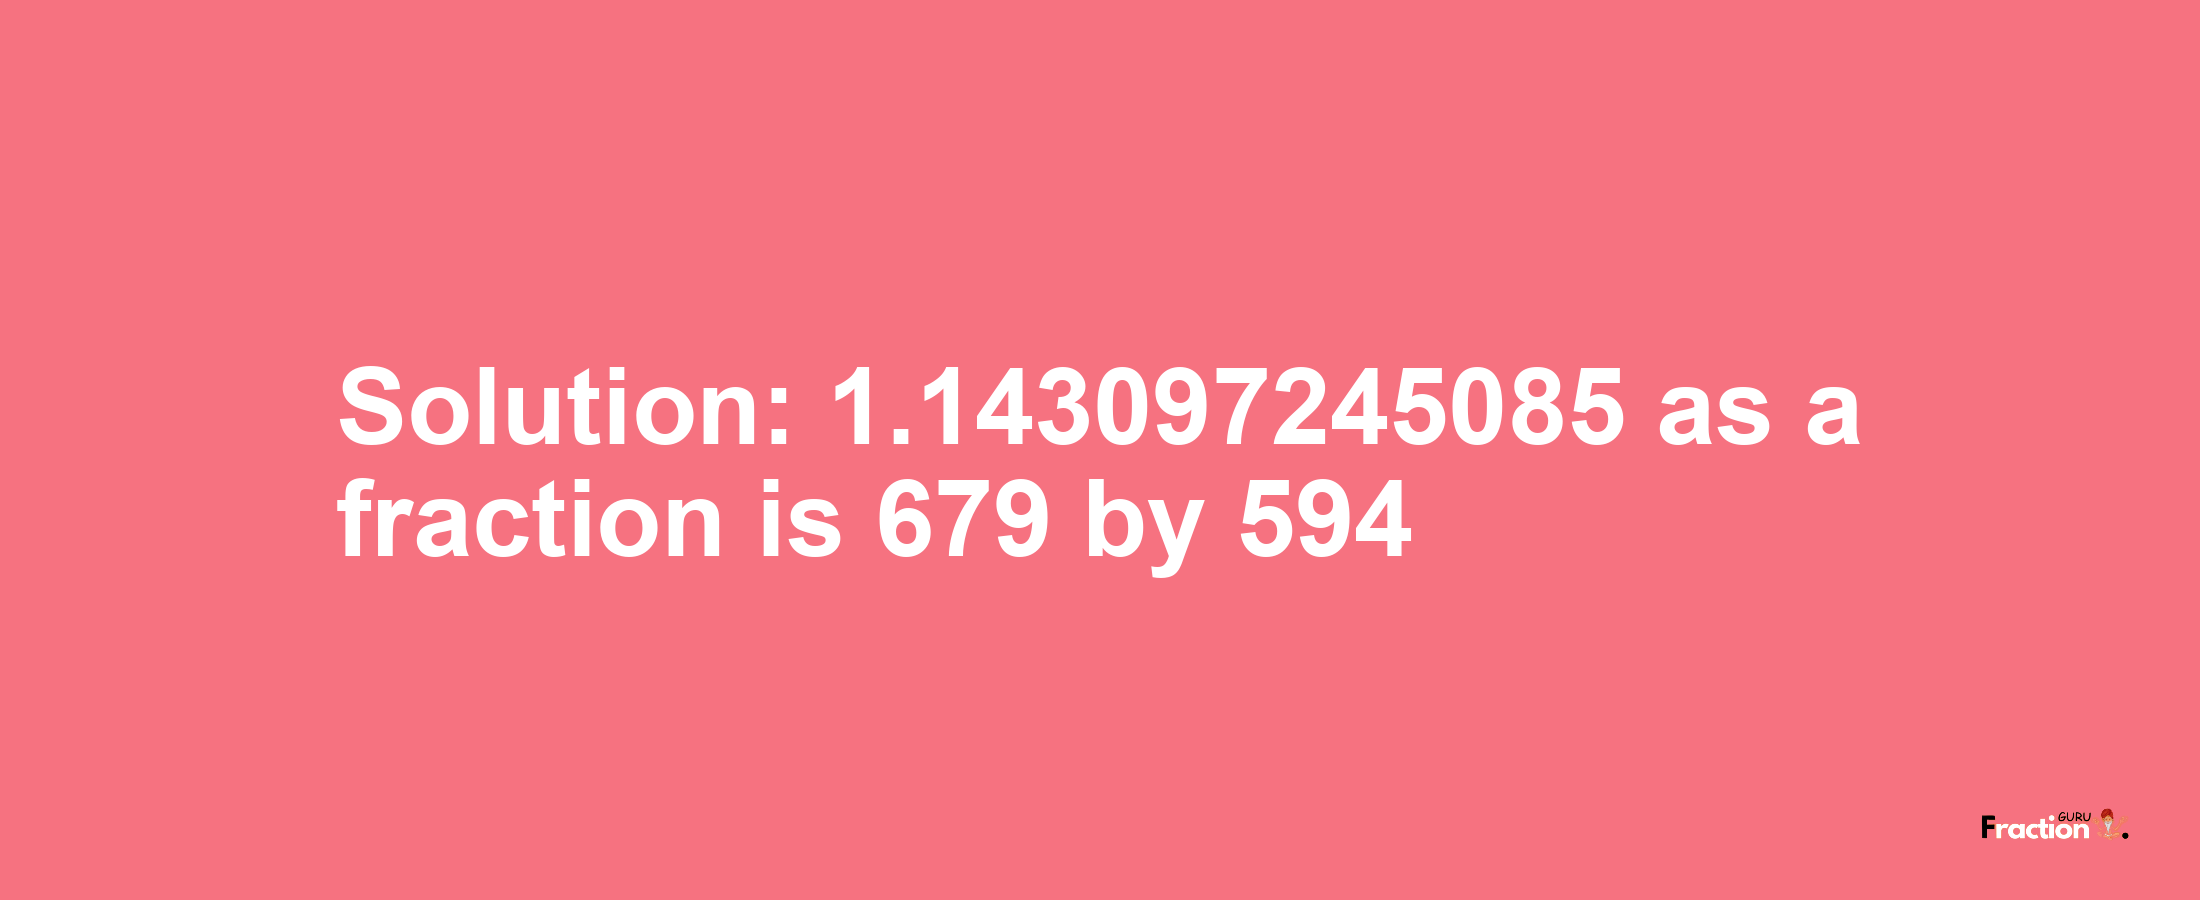 Solution:1.143097245085 as a fraction is 679/594